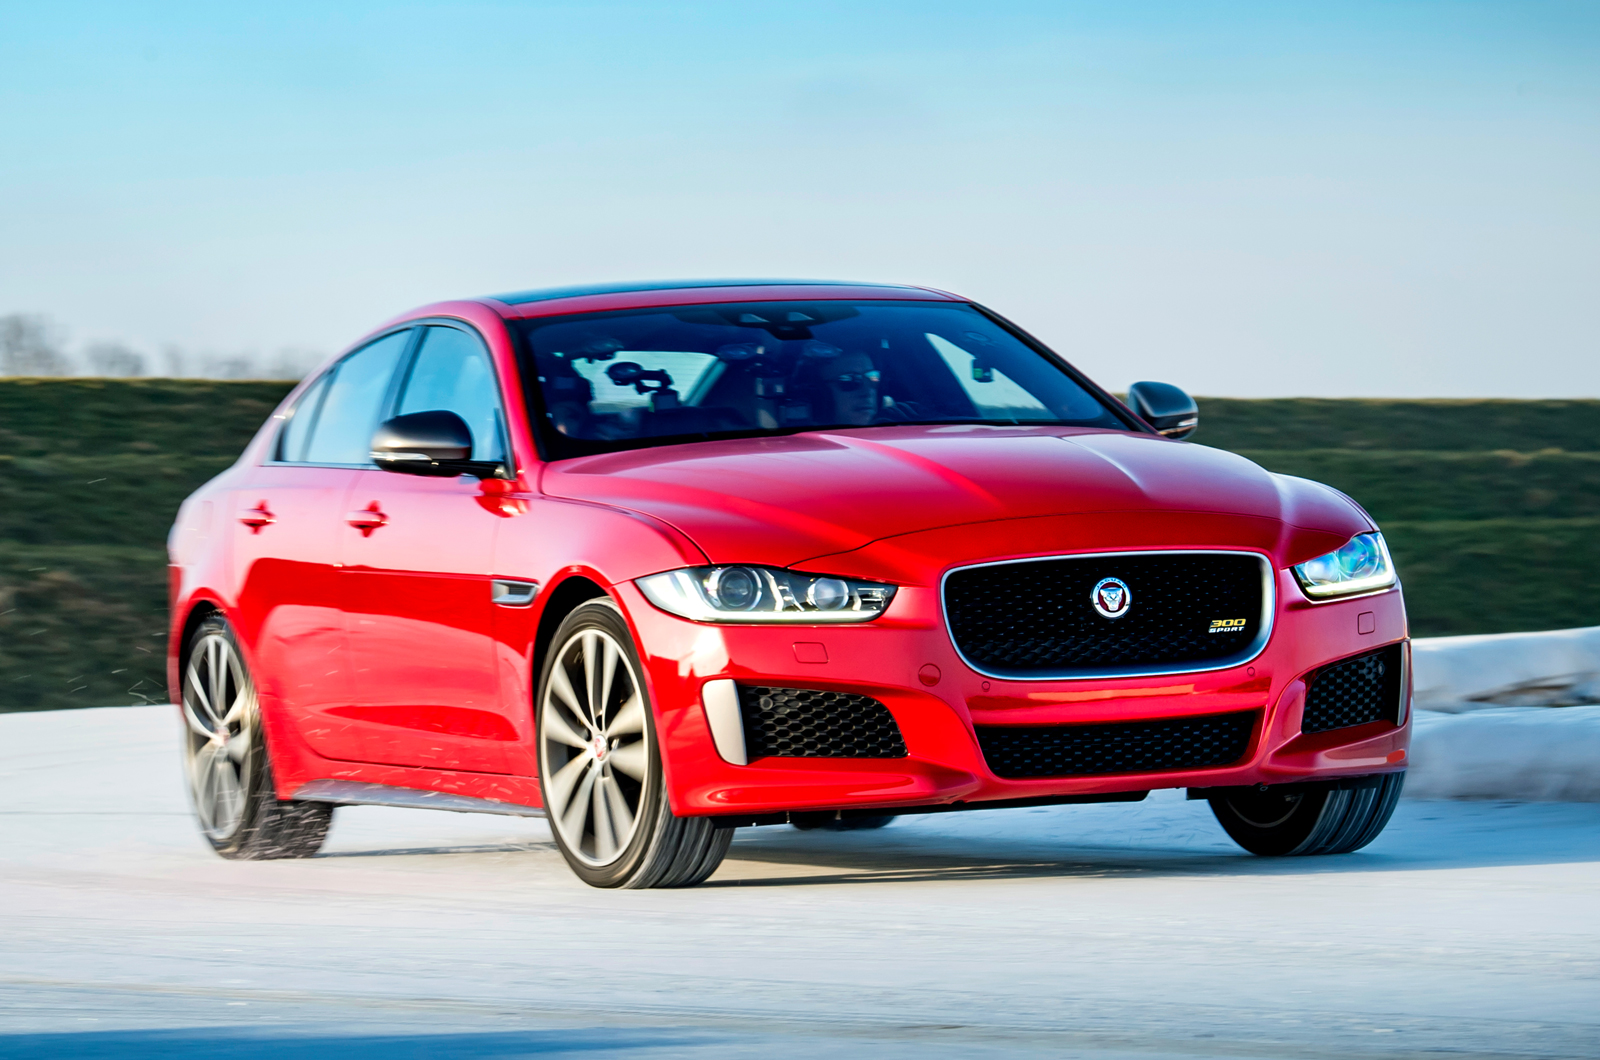 Jaguar XE 300 Sport arrives with 296bhp and all-wheel drive | Autocar